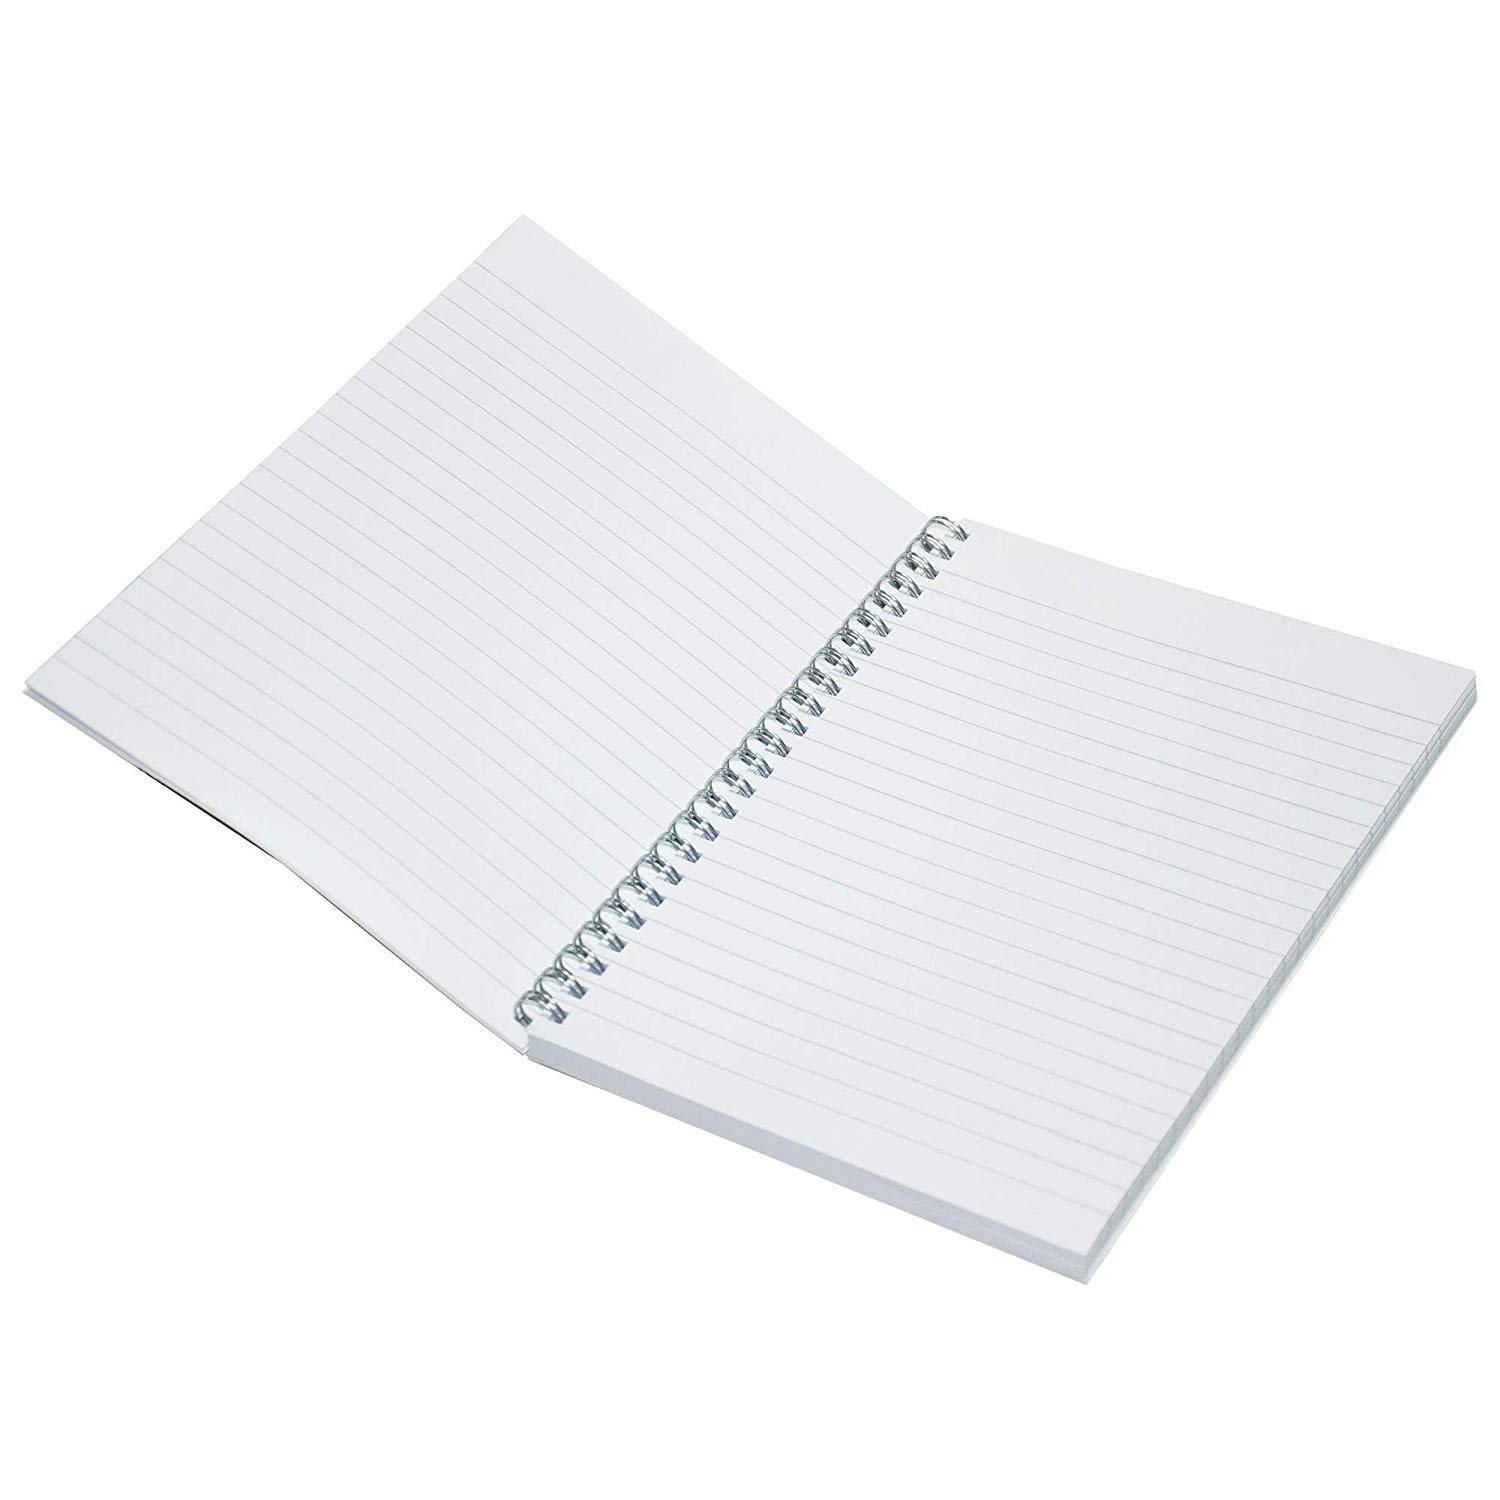 Buy FIS Light Spiral Soft Cover Notebook 100 sheets LINBA41806S - A4 ...